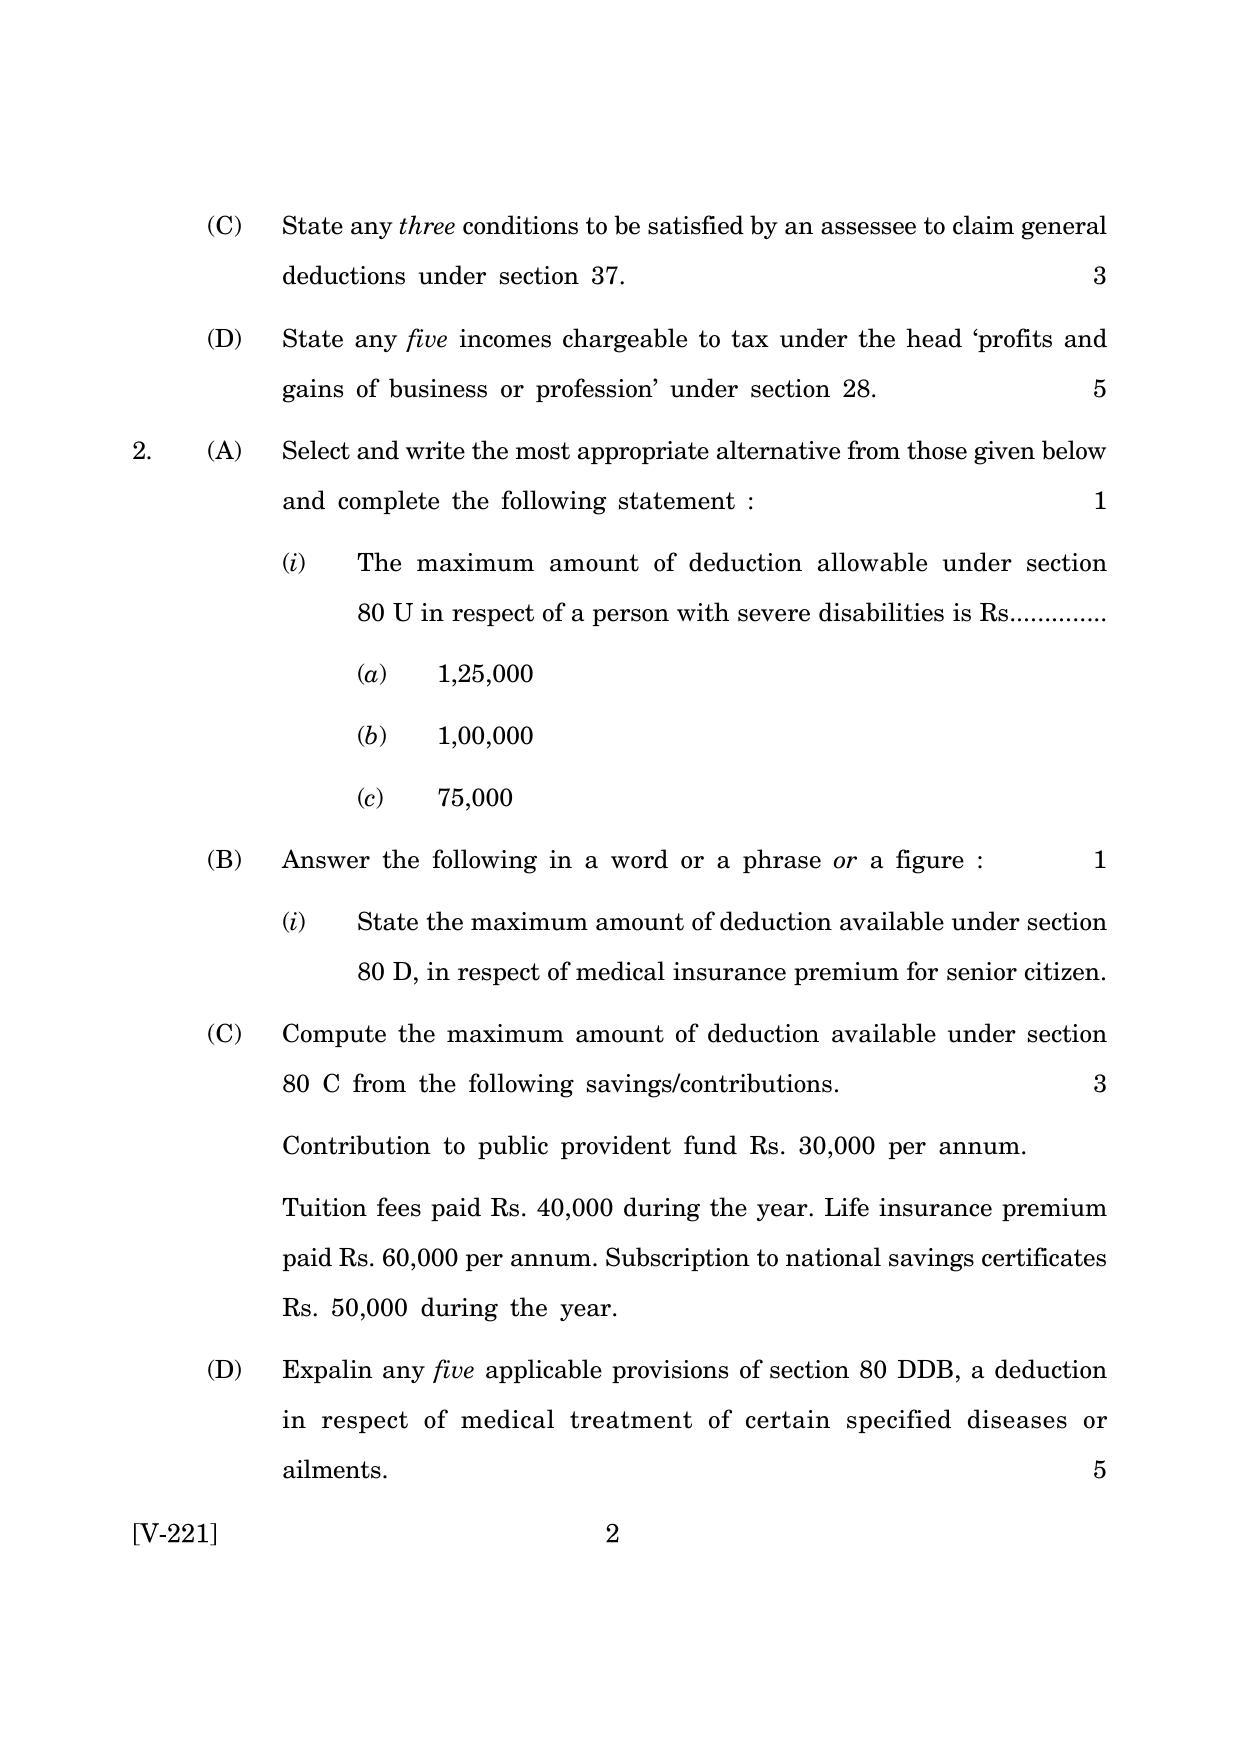 Goa Board Class 12 Cost Accounting & Taxation  2019 (March 2019) Question Paper - Page 2